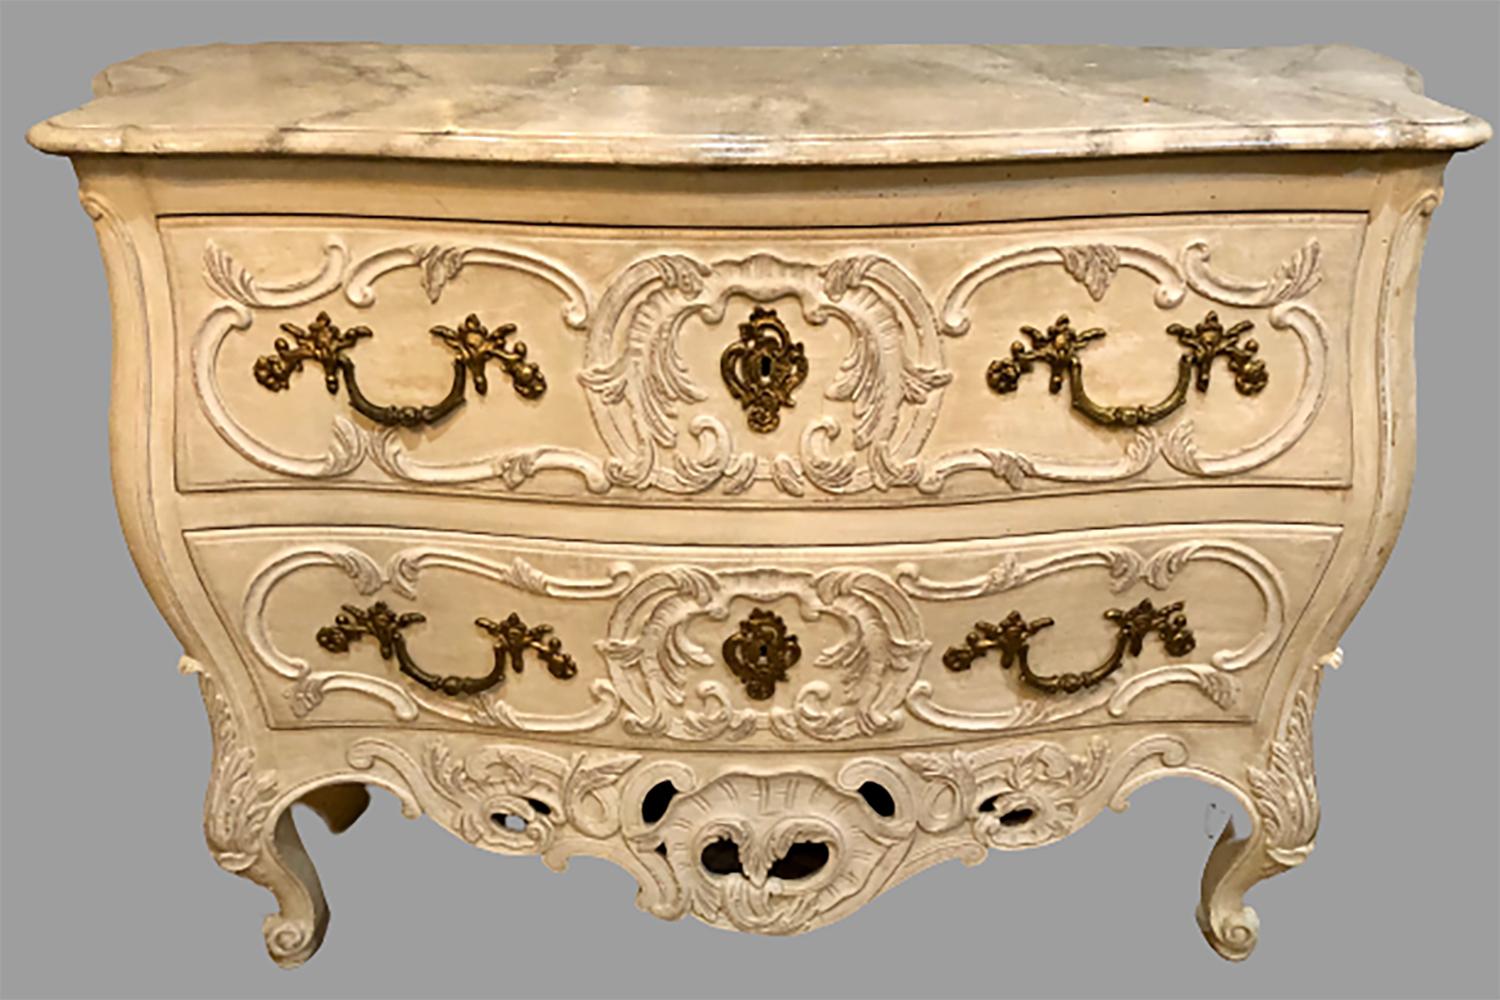 A faux marble top Regency style paint decorated two drawer commode by Maison Jansen. Nicely framed bombe sides sitting on a group of Louis XV legs supporting a Rococo carved and distressed finish commode. The interior all handcrafted cabinet maker